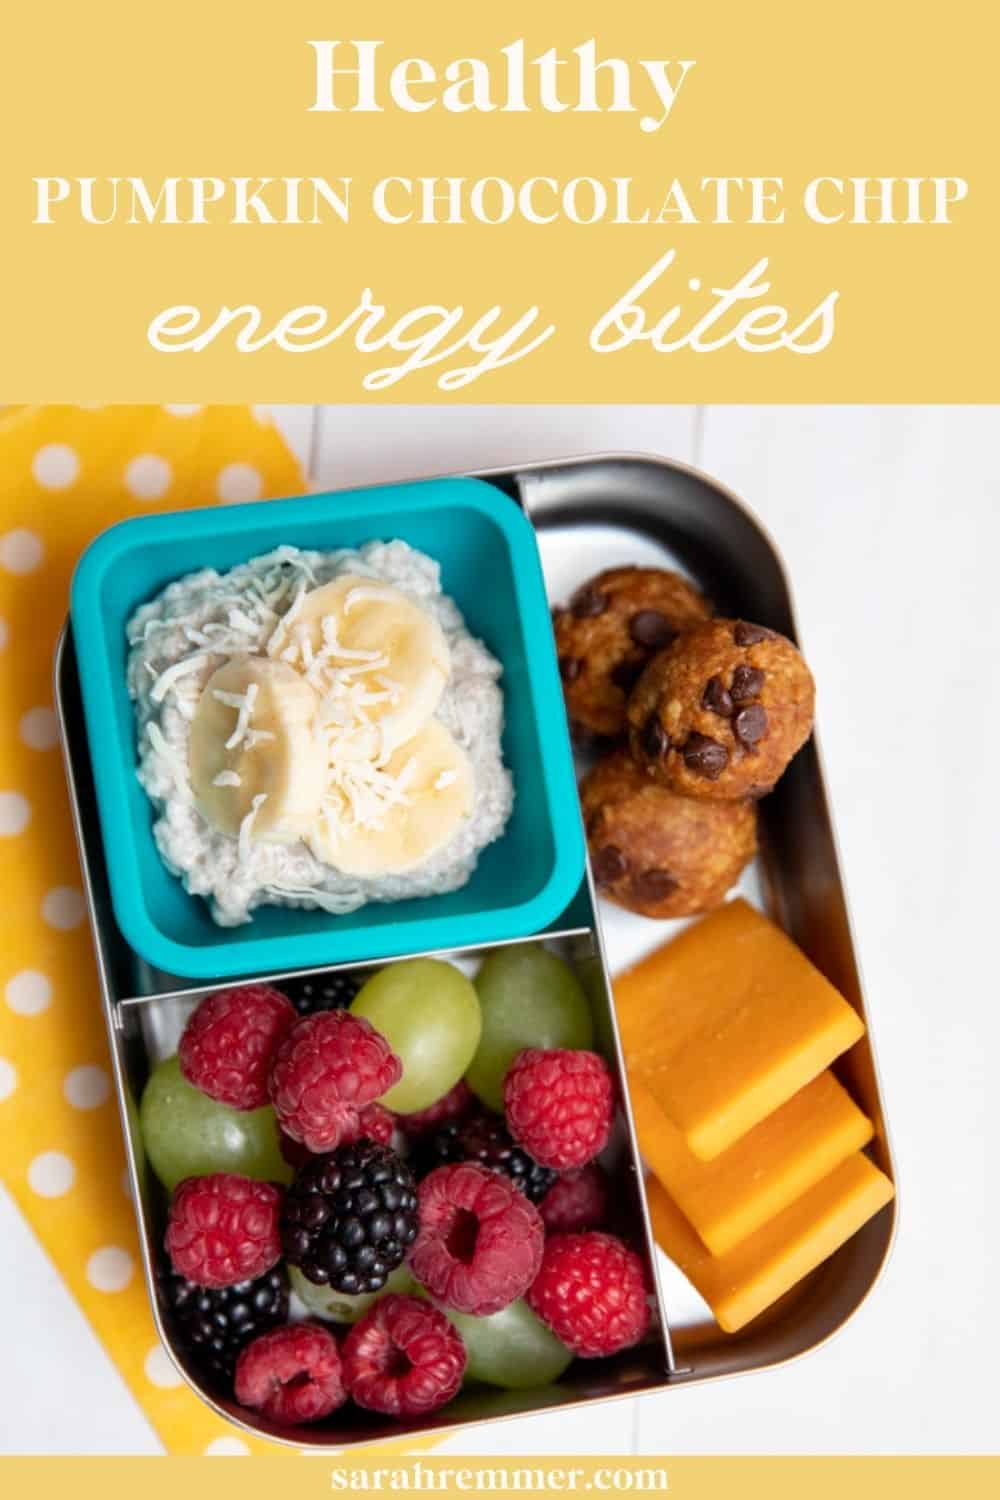 These quick and easy pumpkin spice energy bites have a dose of pumpkin for added flavour and a nutrition boost. A perfect healthy treat!